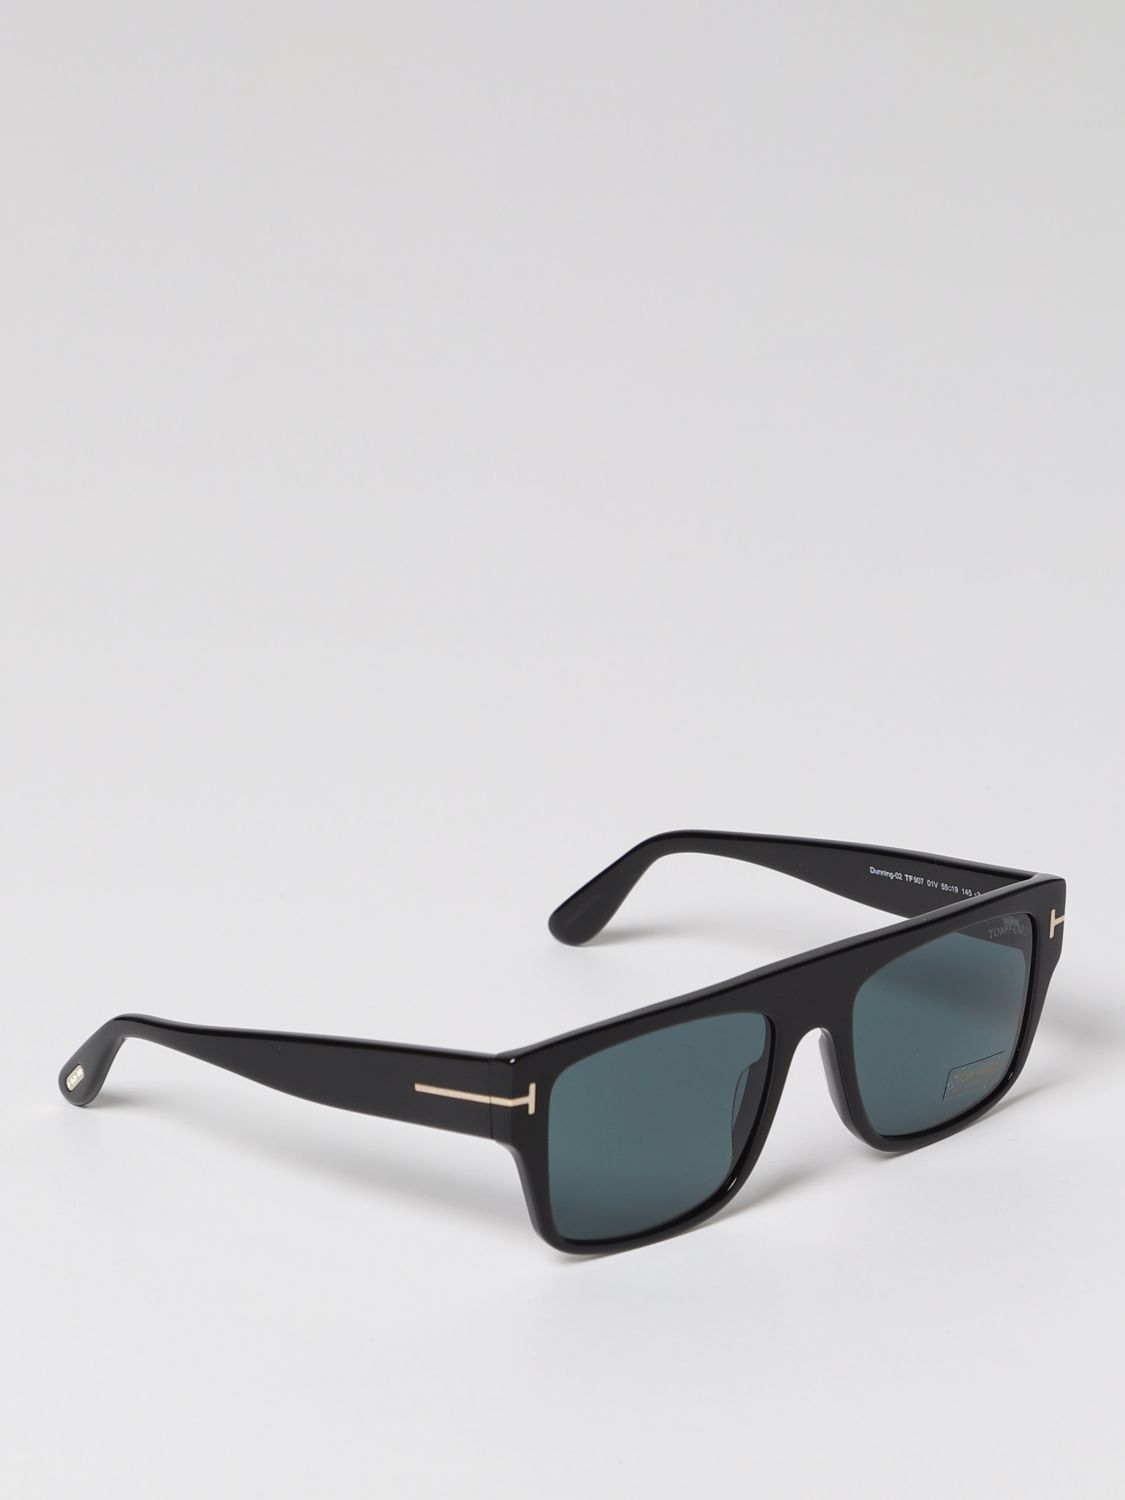 Tom Ford Outlet: sunglasses for man - Black | Tom Ford sunglasses TF 907  DUNNING-02 online on 